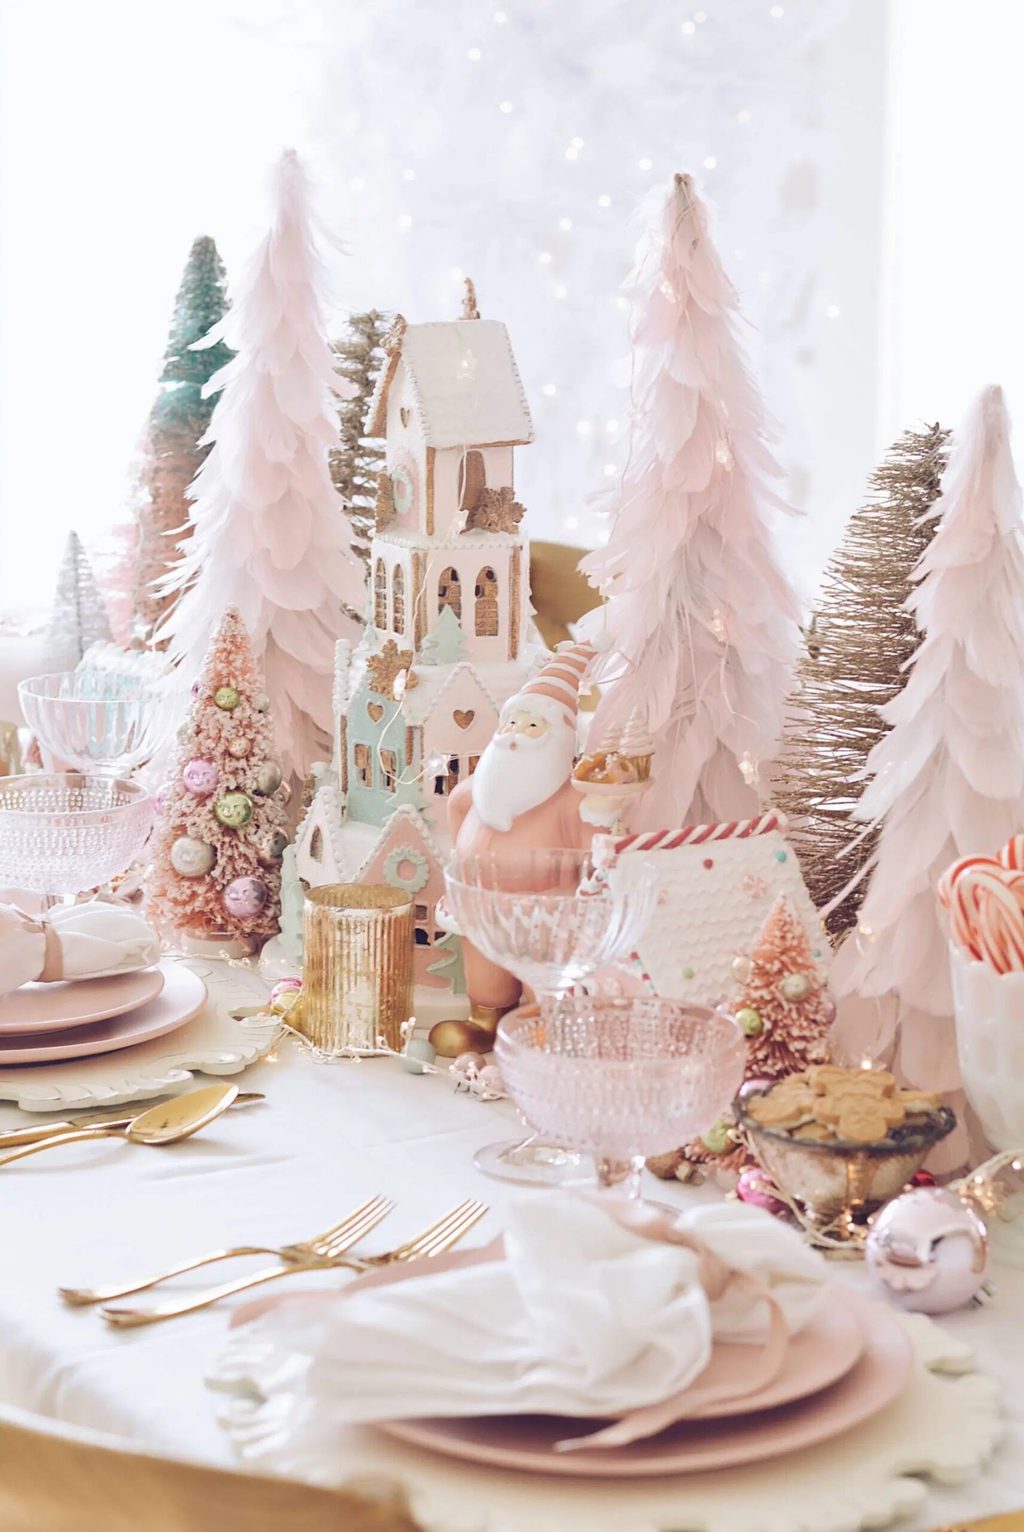 7 Festive Styles To Inspire Your Christmas Centerpiece For The Table